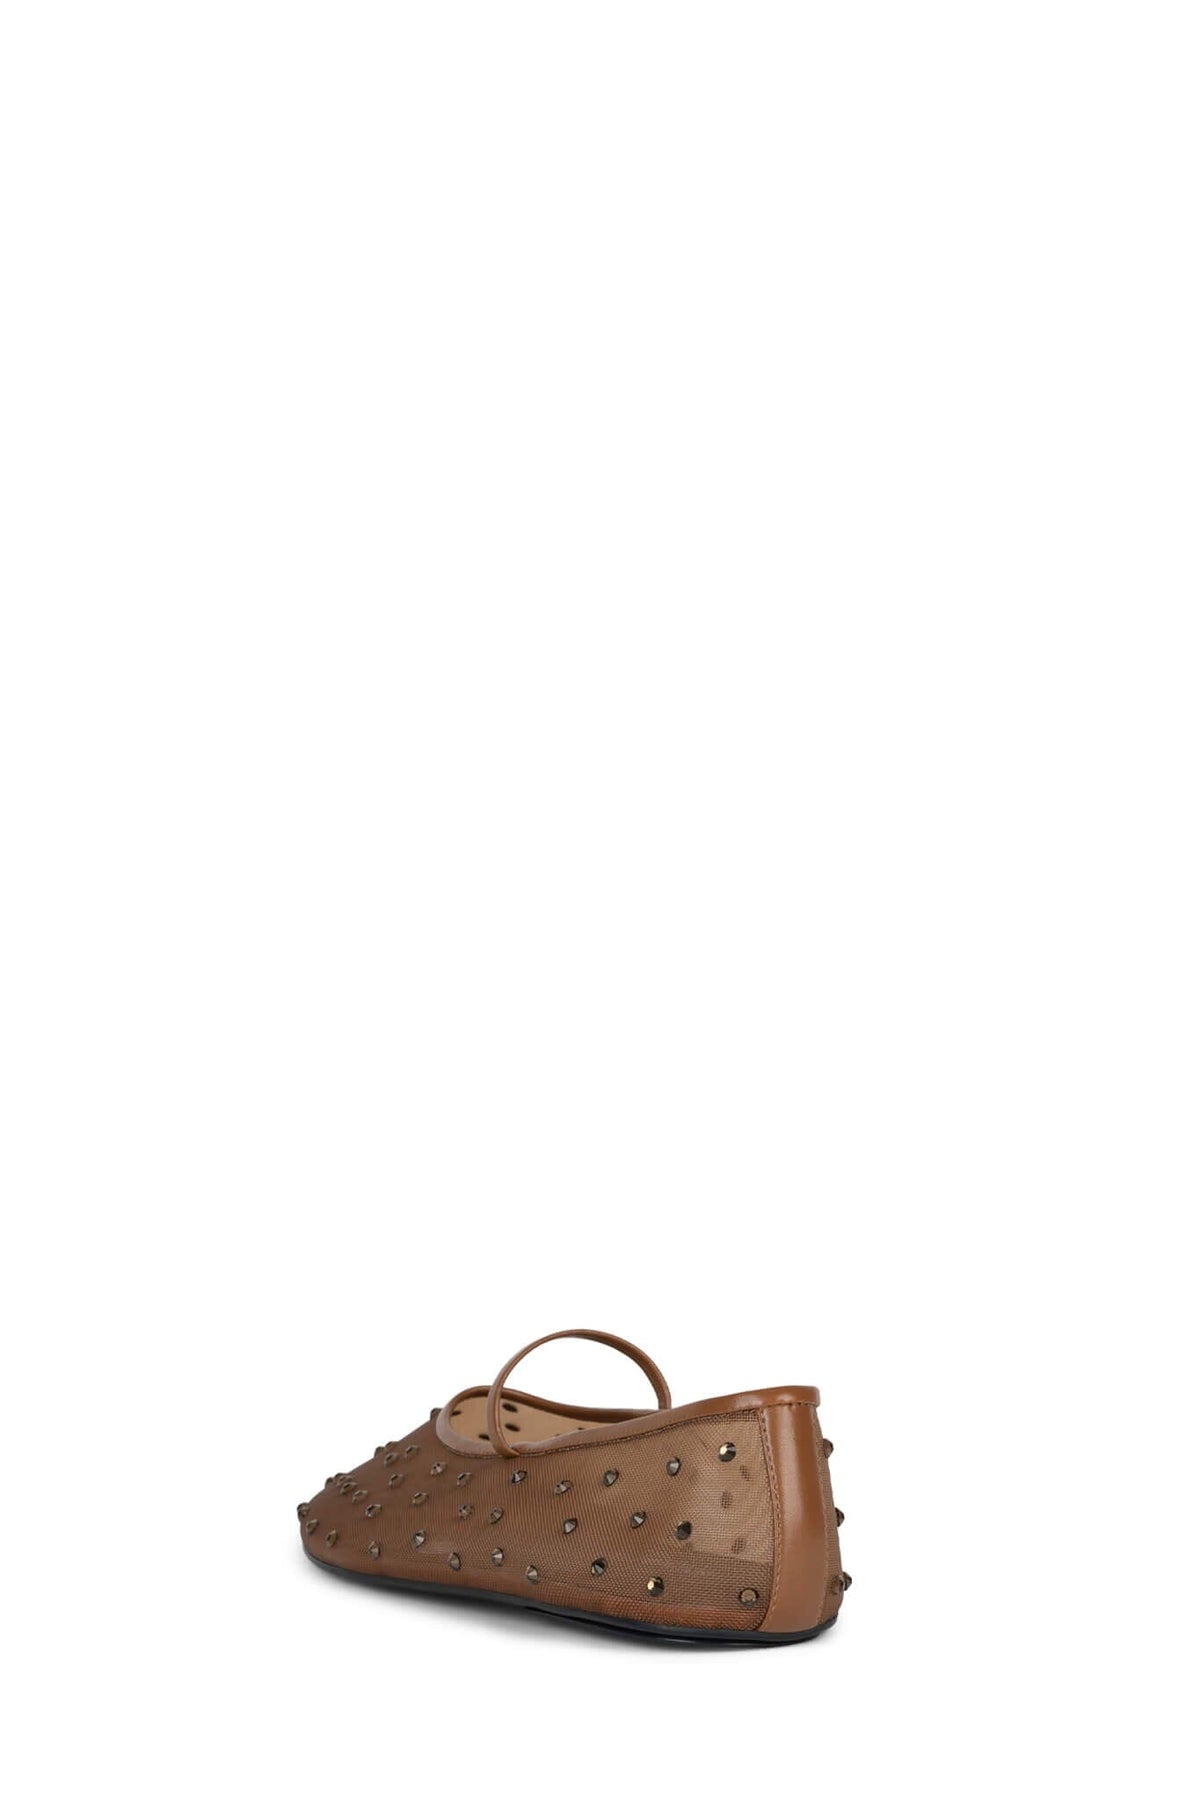 Jeffrey Campbell Mary Janes Ballet Flats Brown